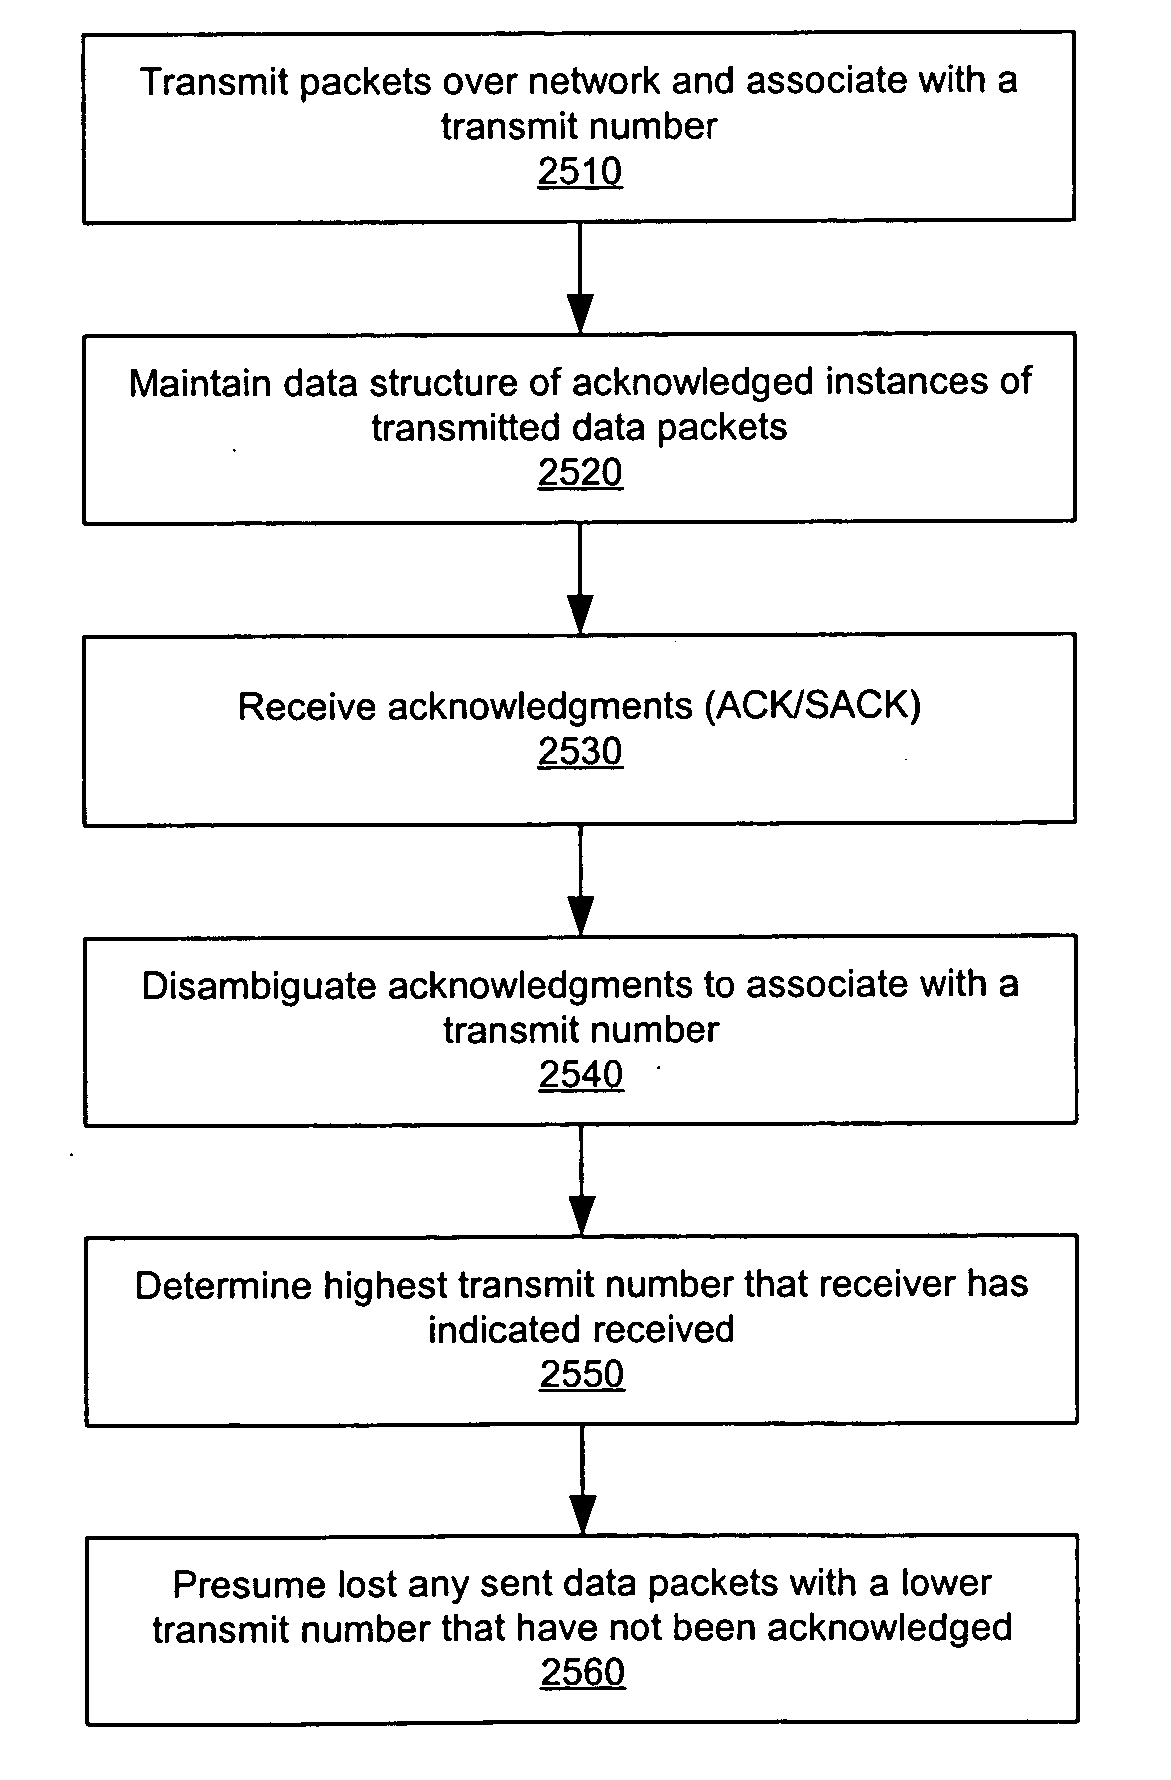 Transaction boundary detection for reduction in timeout penalties